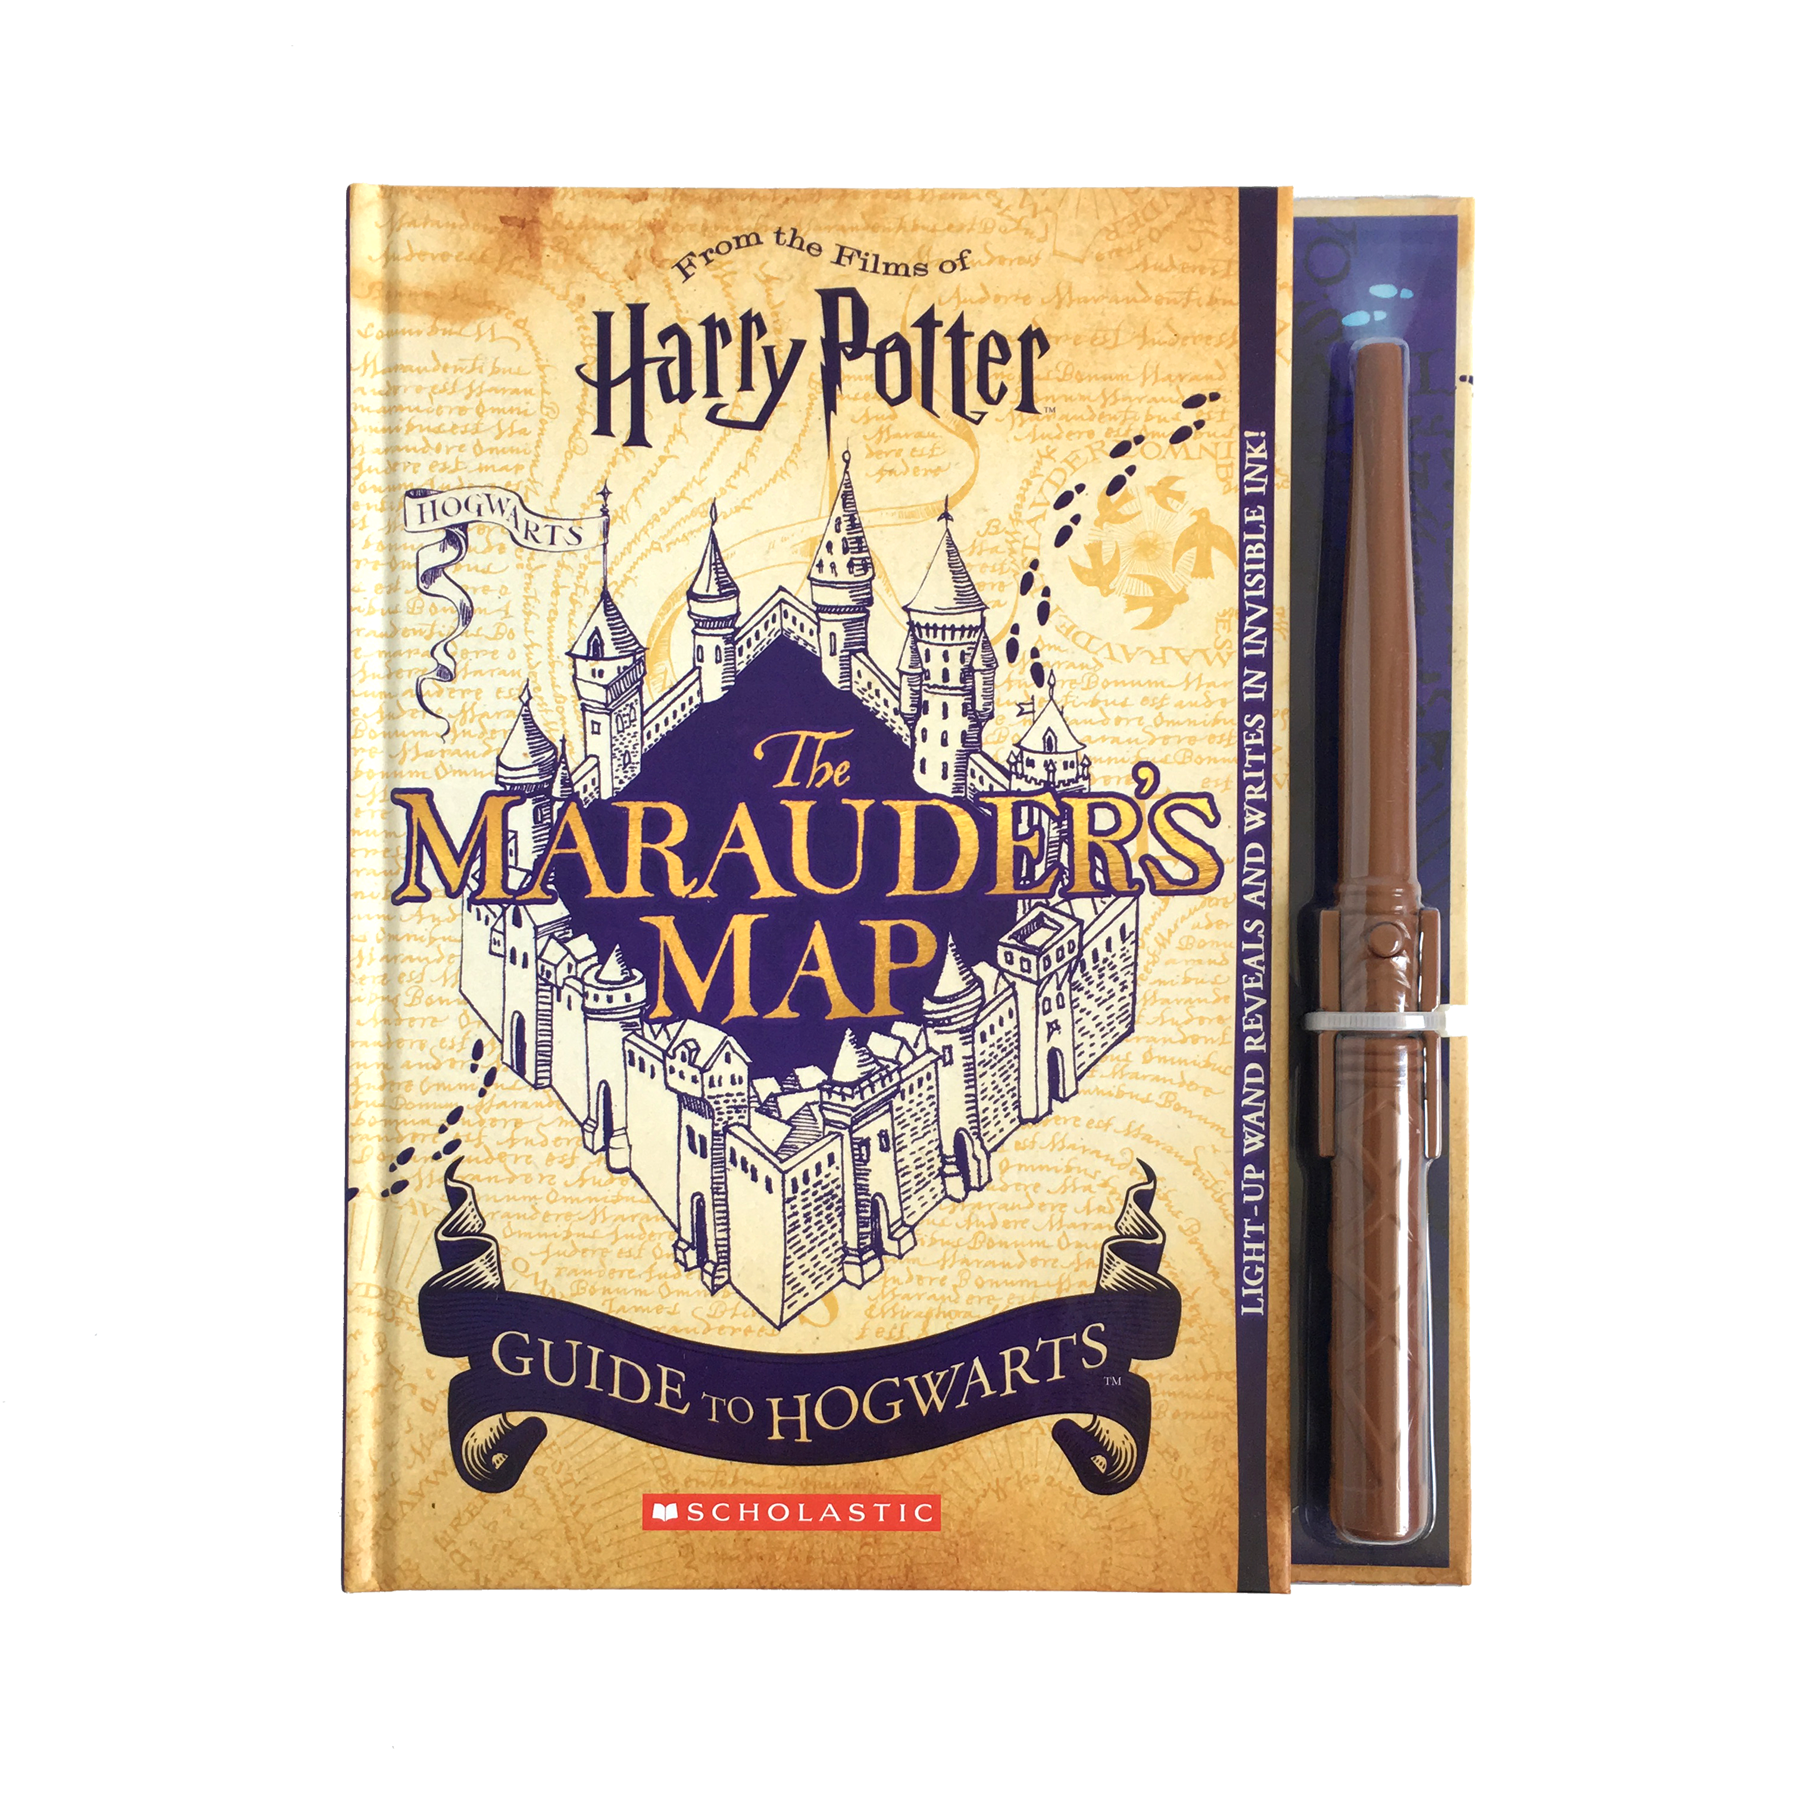 Harry Potter Official Wand & Broom Pen And Pencil Set Stationary Hogwarts